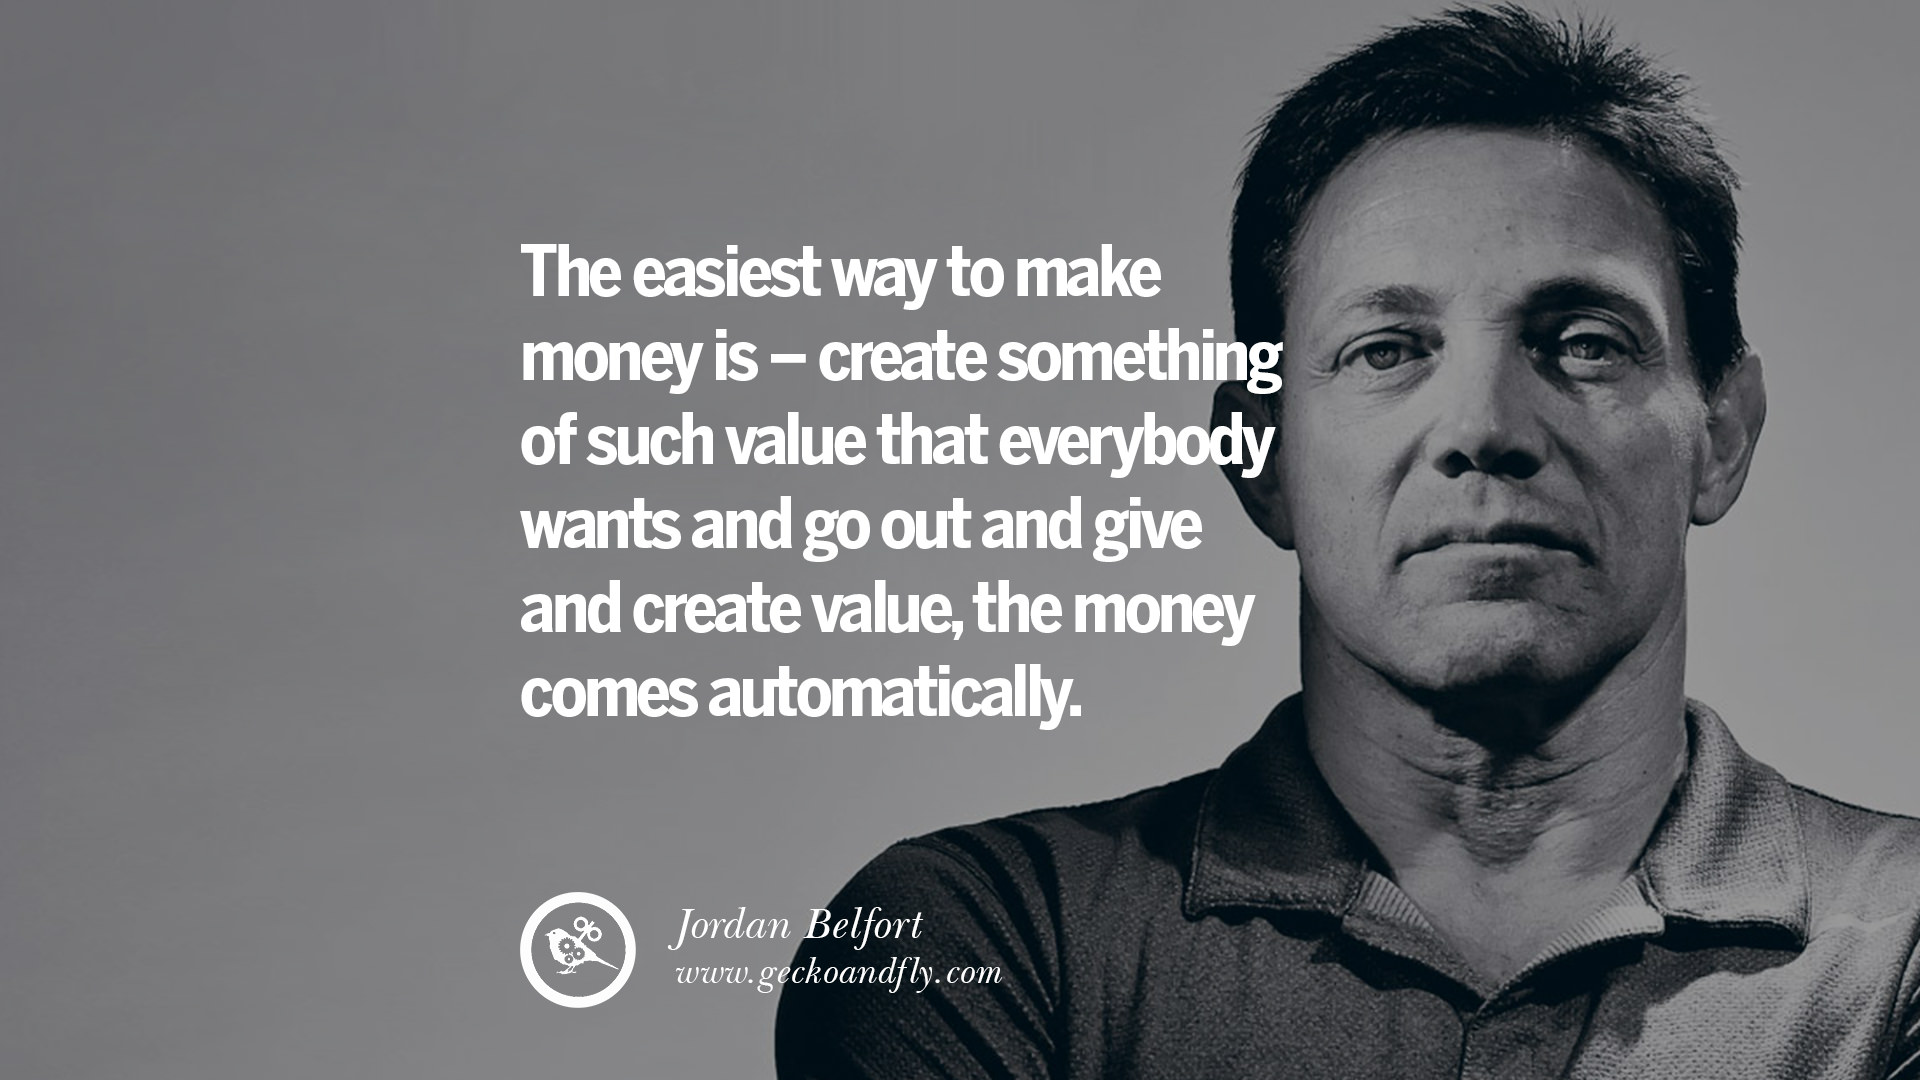 Jordan Belfort - The Wolf of Wall Street: Why Cryptocurrency is the Great  Equaliser